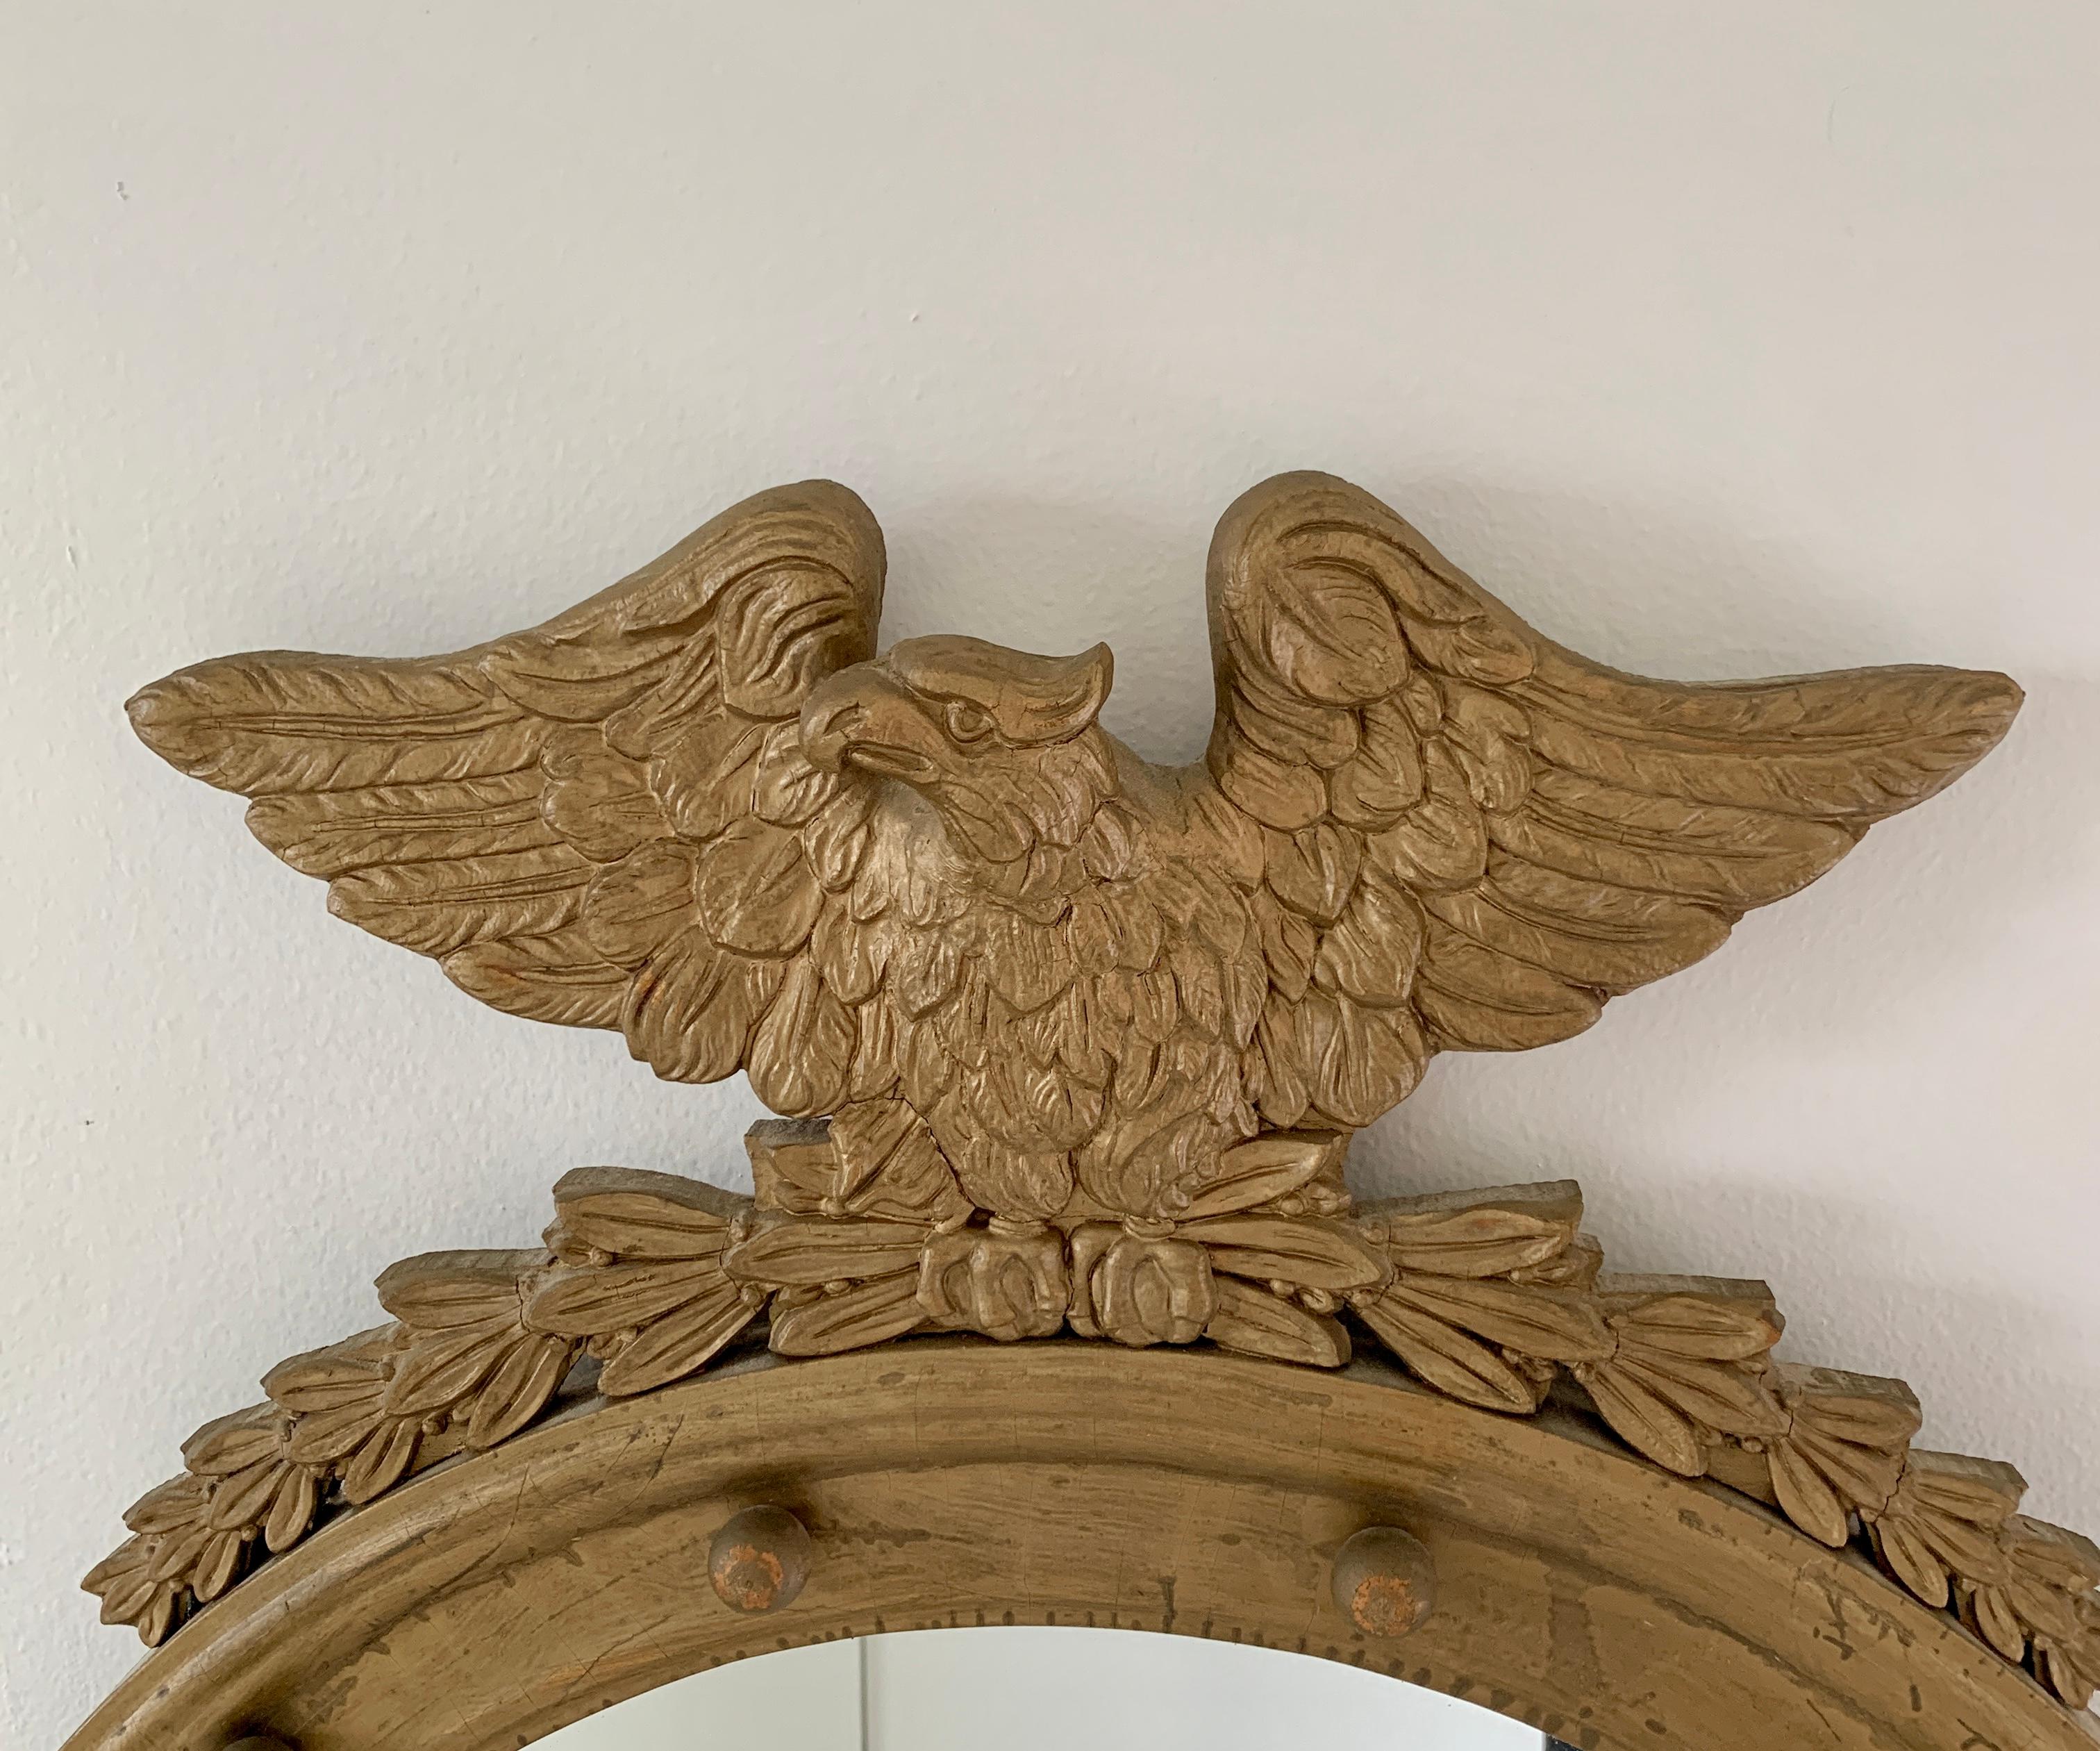 A gorgeous Federal or Regency style wall mirror featuring a carved eagle with open wings standing on olive branches and 13 small spheres representing the original 13 colonies around the inside perimeter.

USA, late 19th century

giltwood frame,